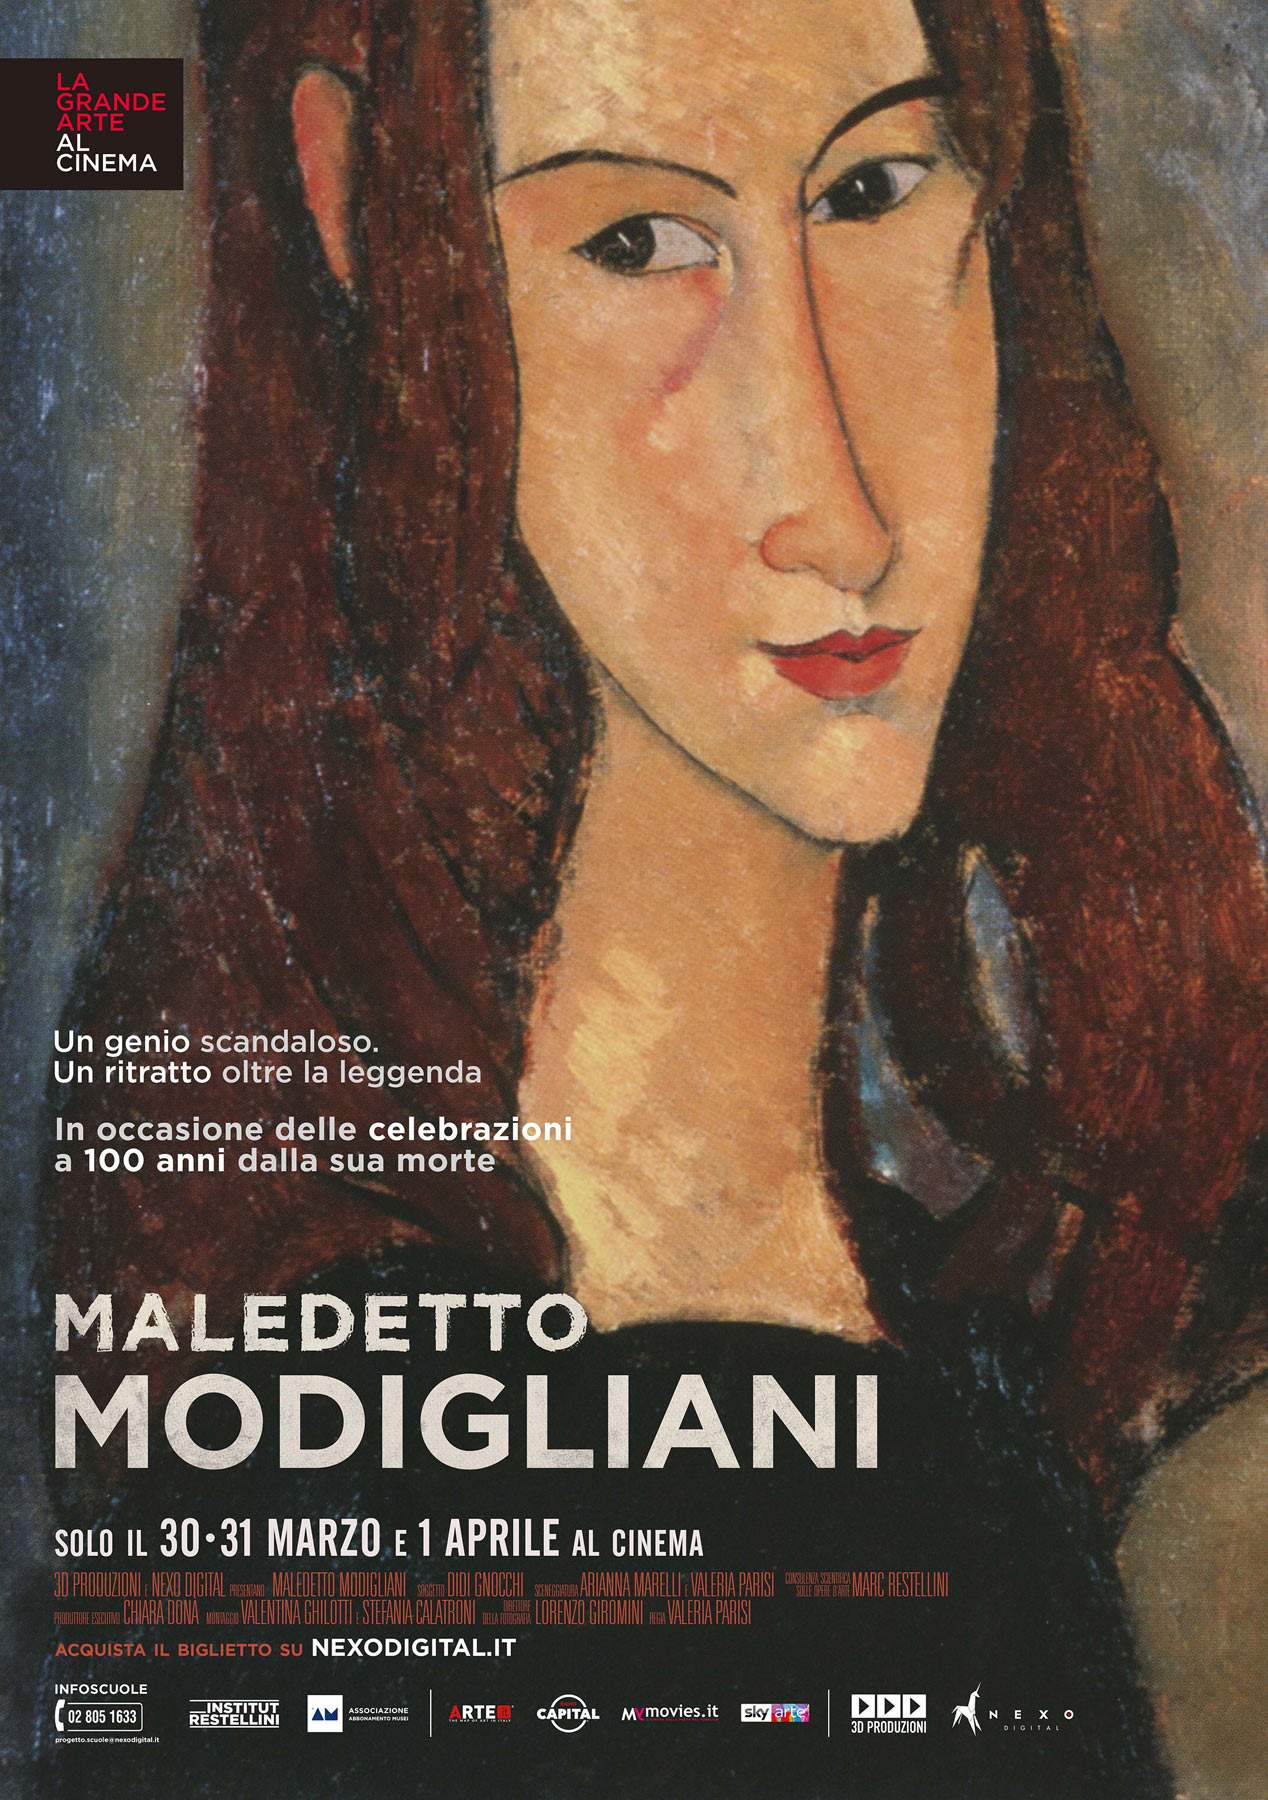 A documentary for Amedeo Modigliani on the centenary of his death. Coming to theaters in March